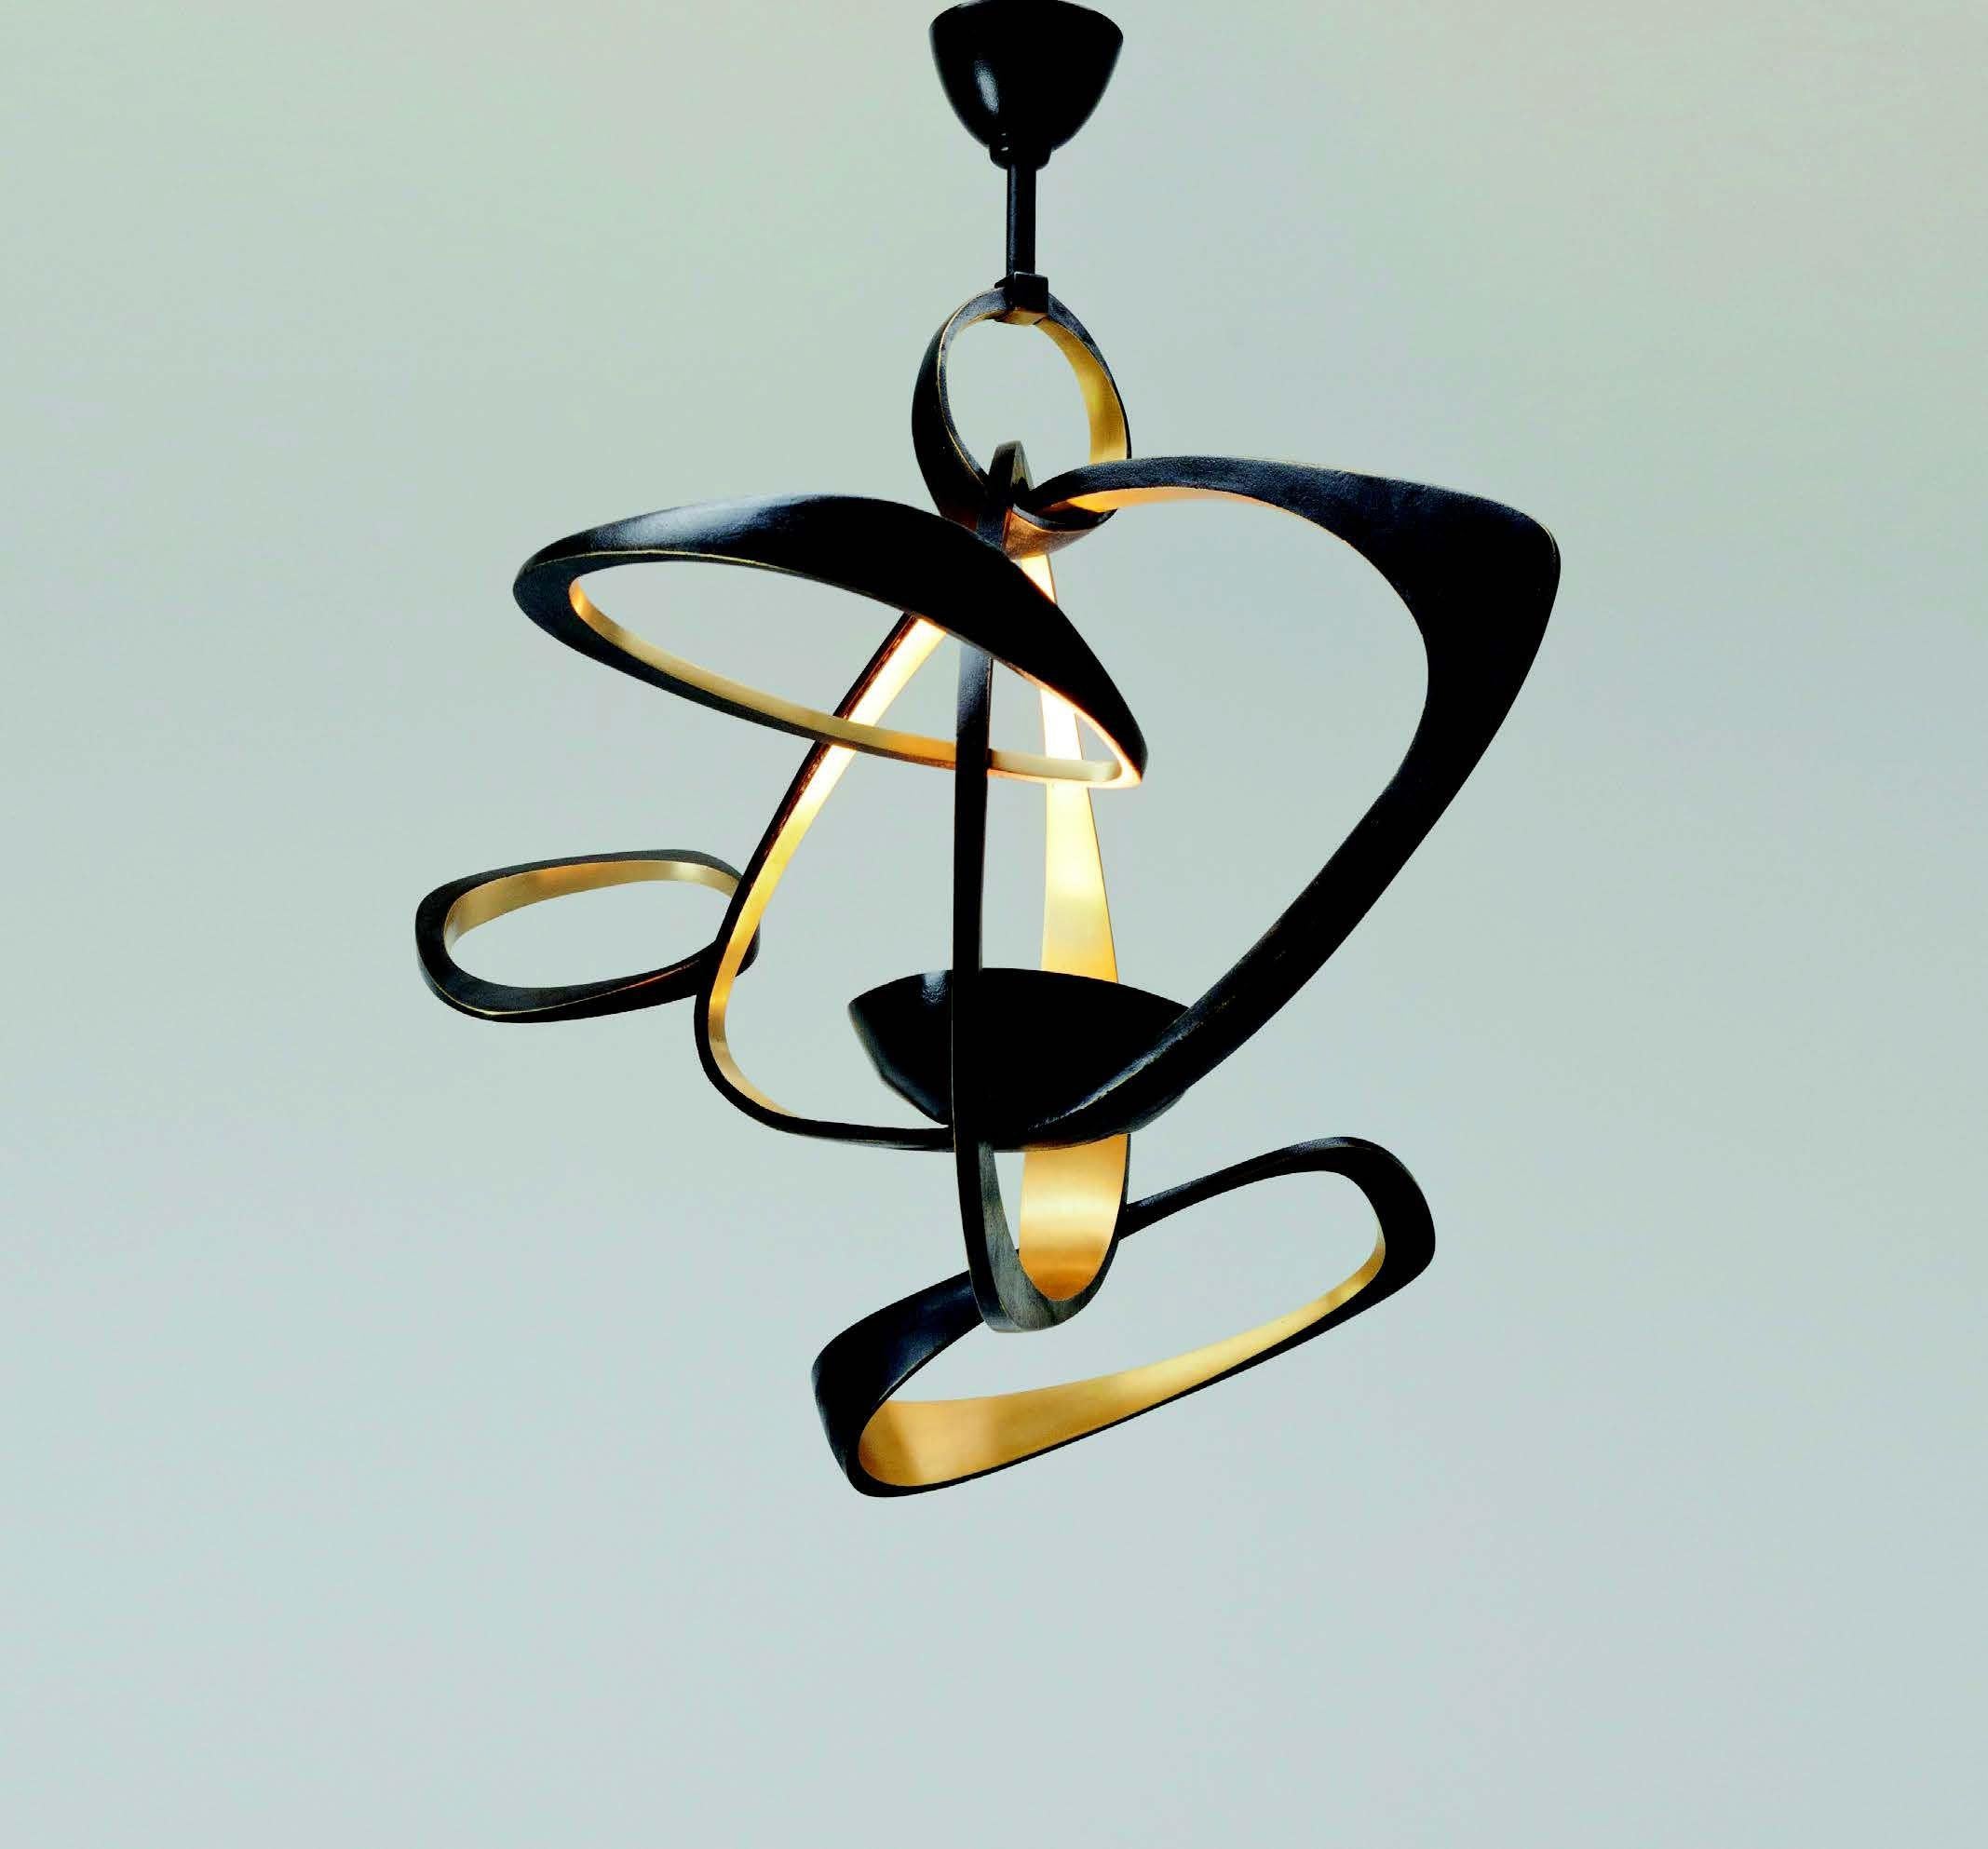 Hanging light fixture from the esteemed French contemporary designer.